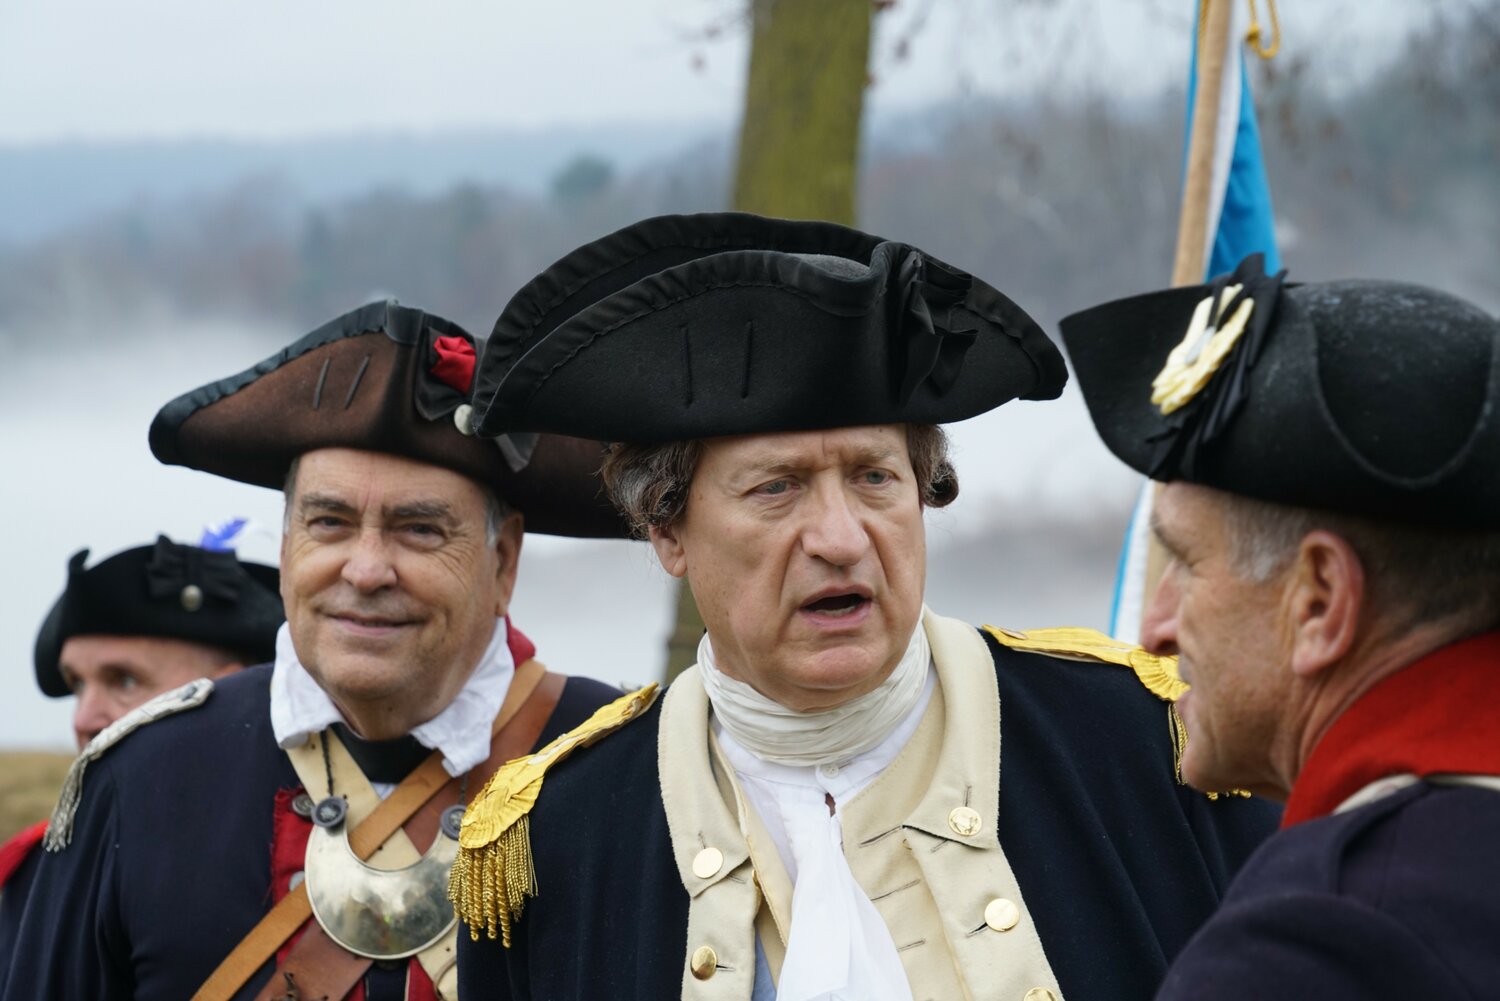 John Godzieba, who has portrayed George Washington at crossing reenactments and other events for many years, speaks to a fellow reenactor Sunday.